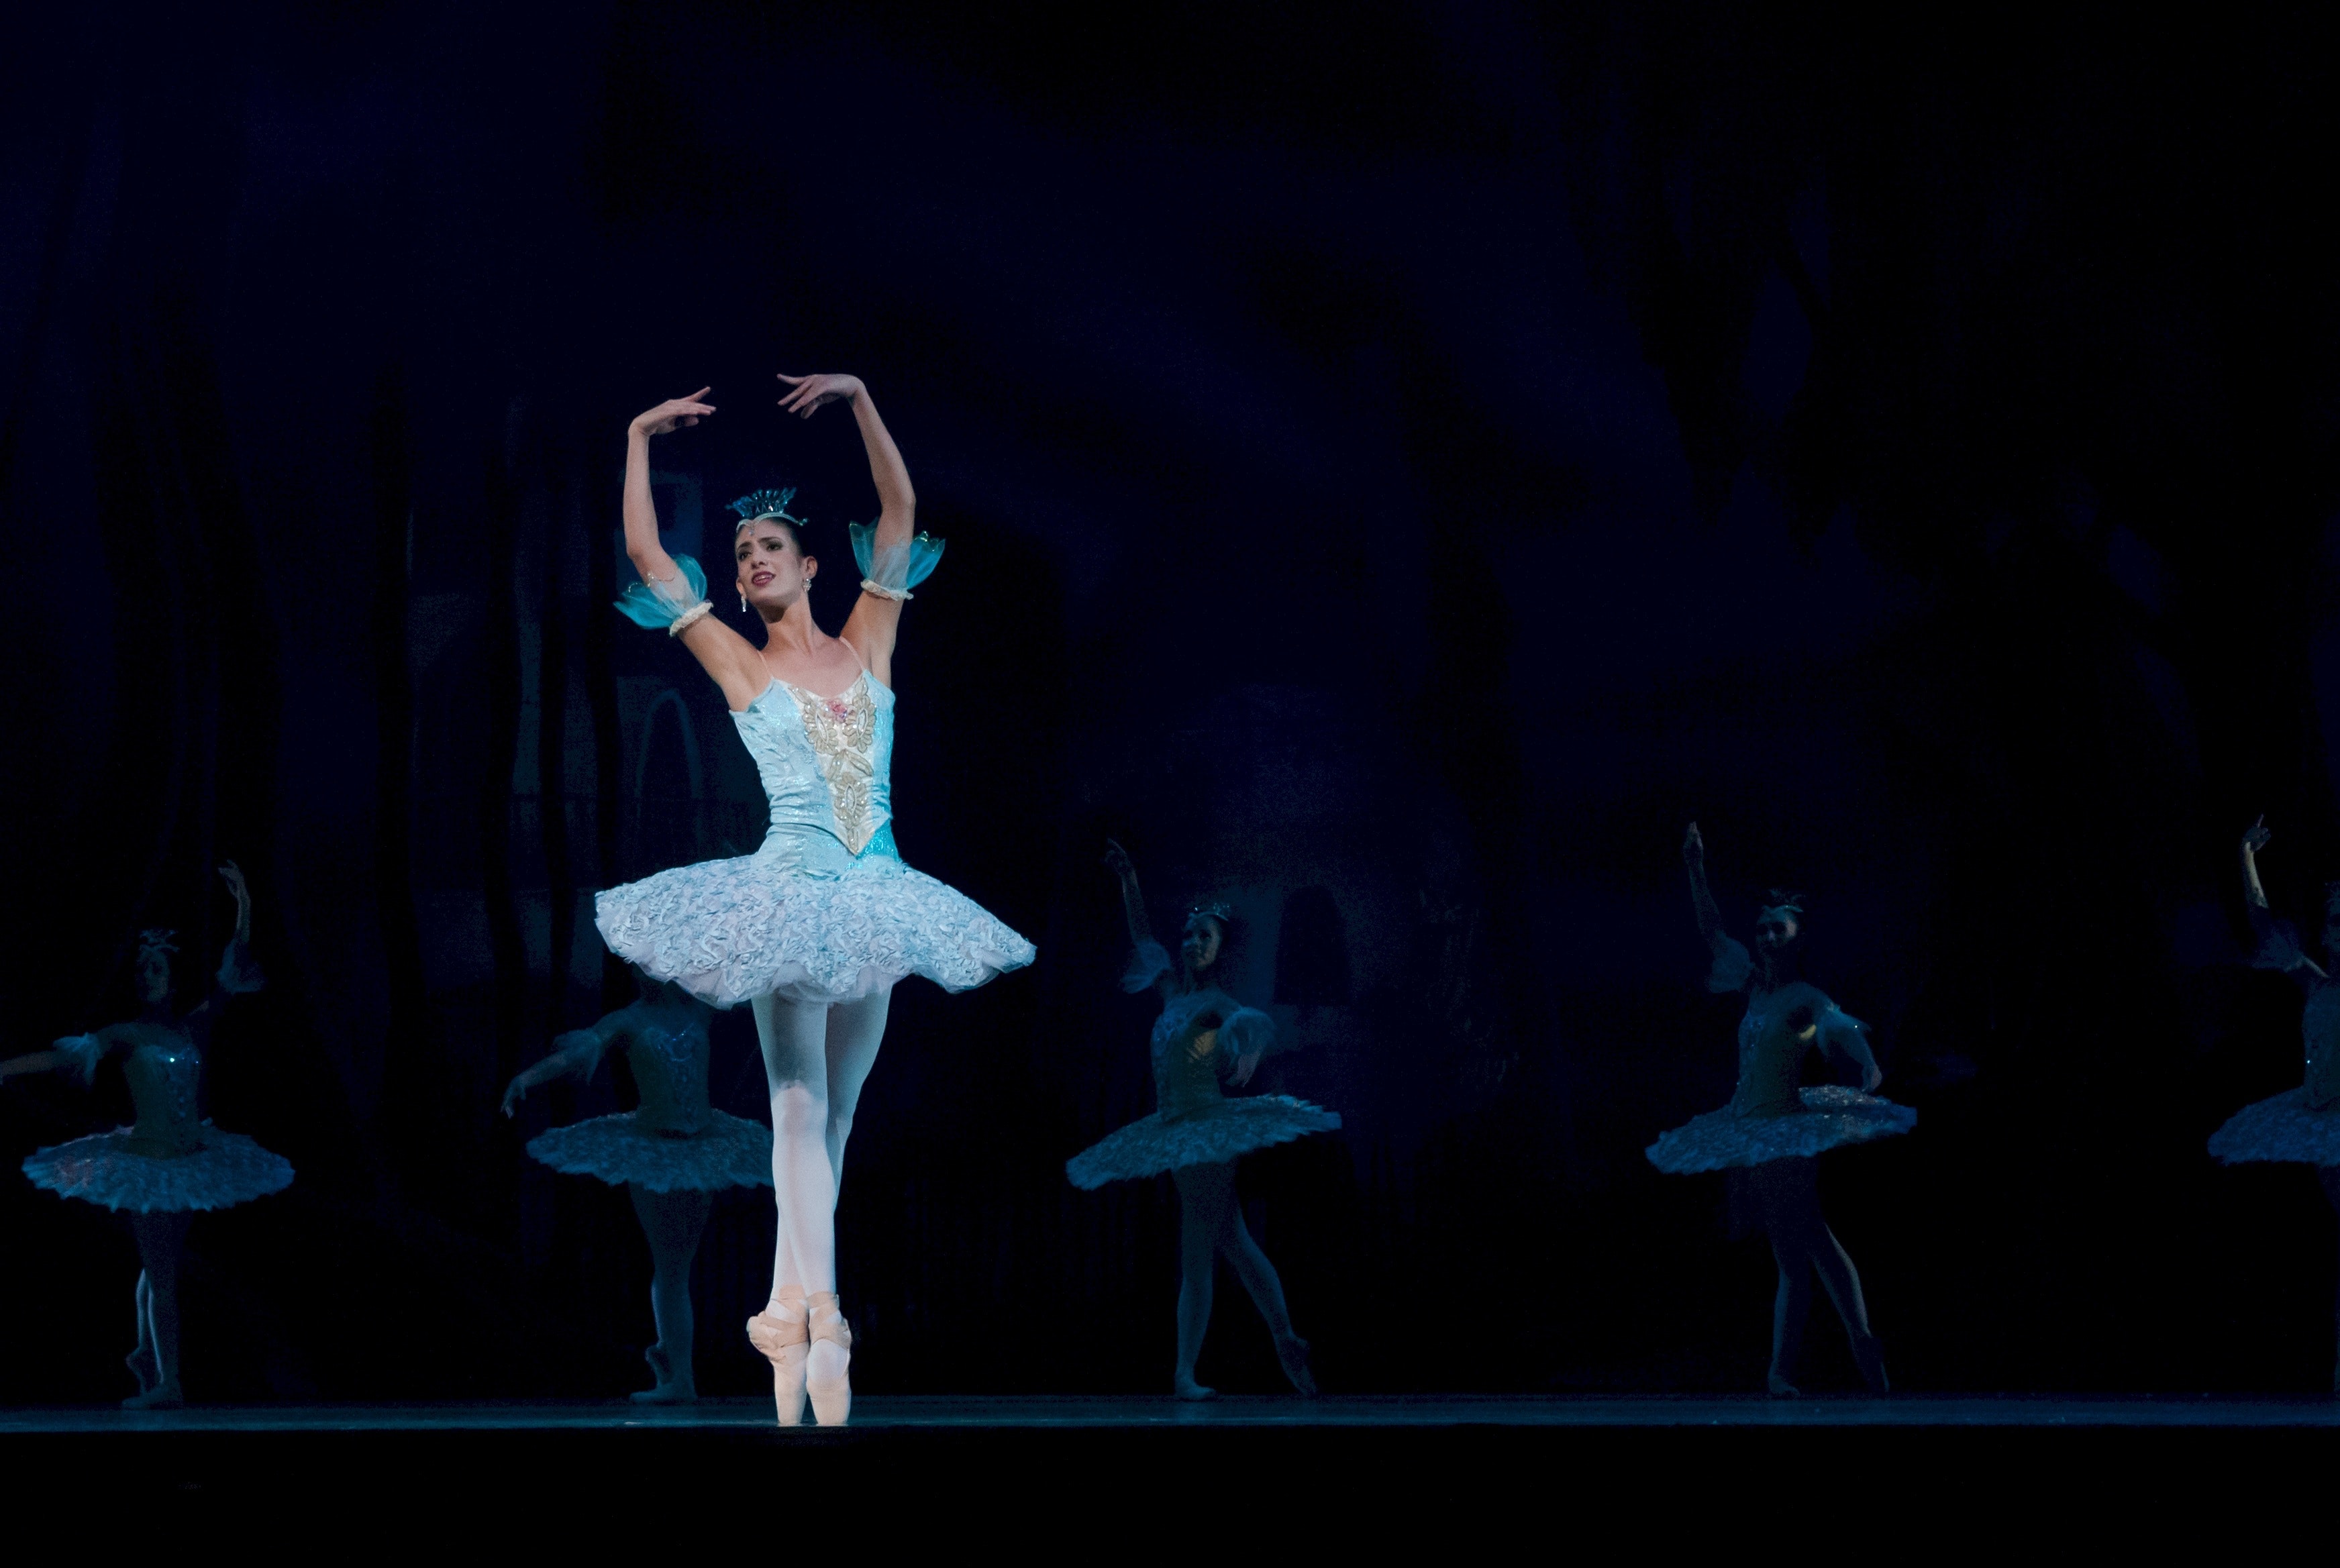 Woman in Blue Ballerina Dress Performing Dance, Leap, Woman, Tutu, Stage, HQ Photo